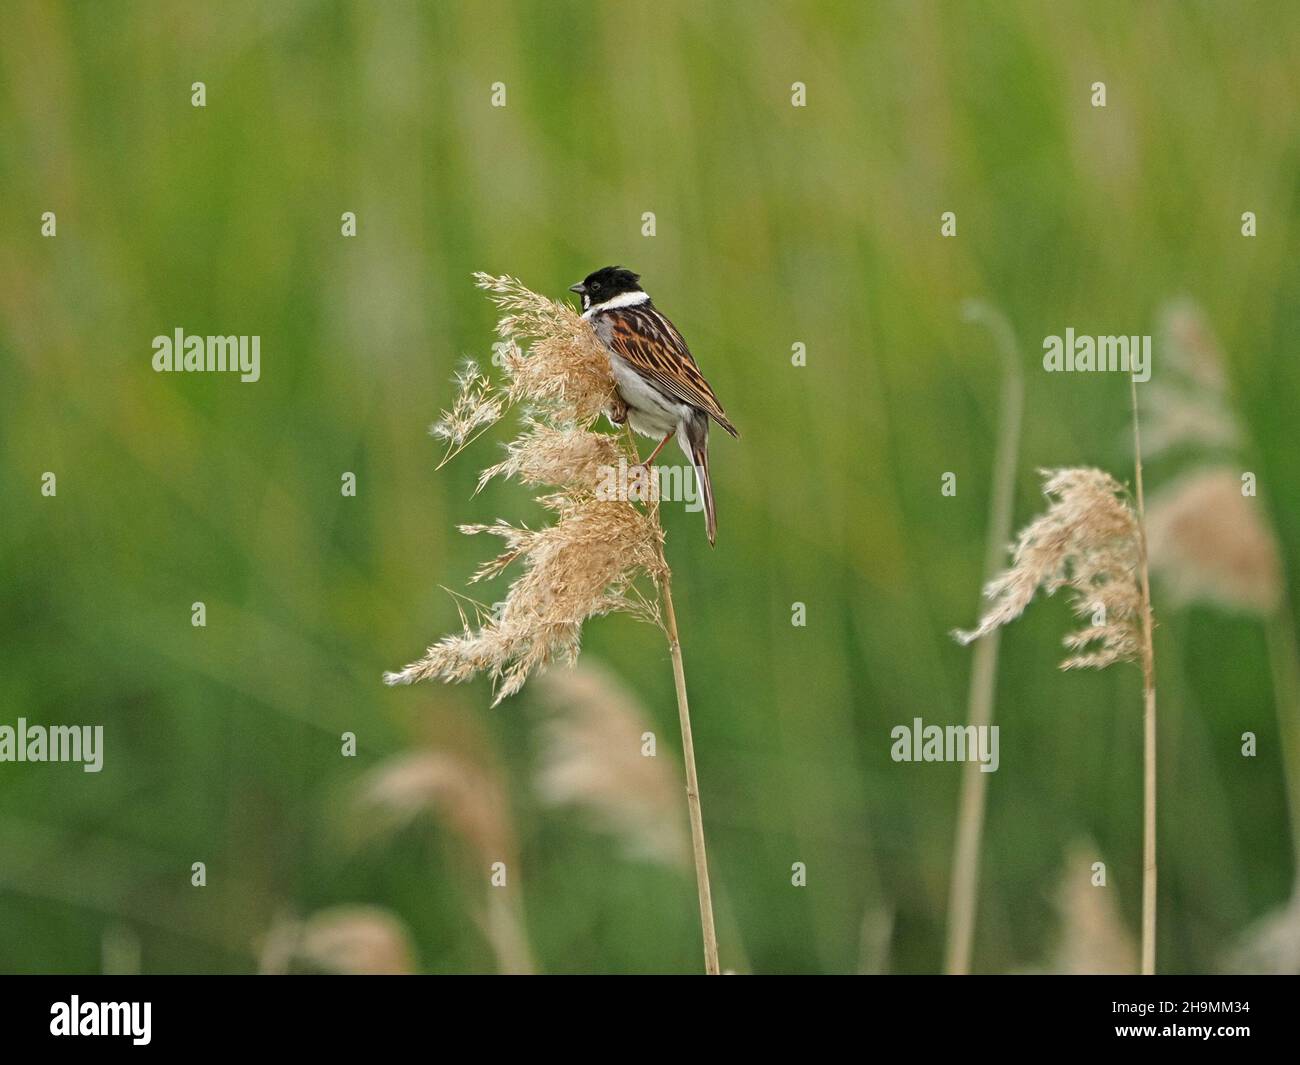 male Reed Bunting (Emberiza schoeniclus) in breeding plumage on fluffy seed-head in reedbed at St Aidan's RSPB Nature Reserve,Yorkshire, England,UK Stock Photo